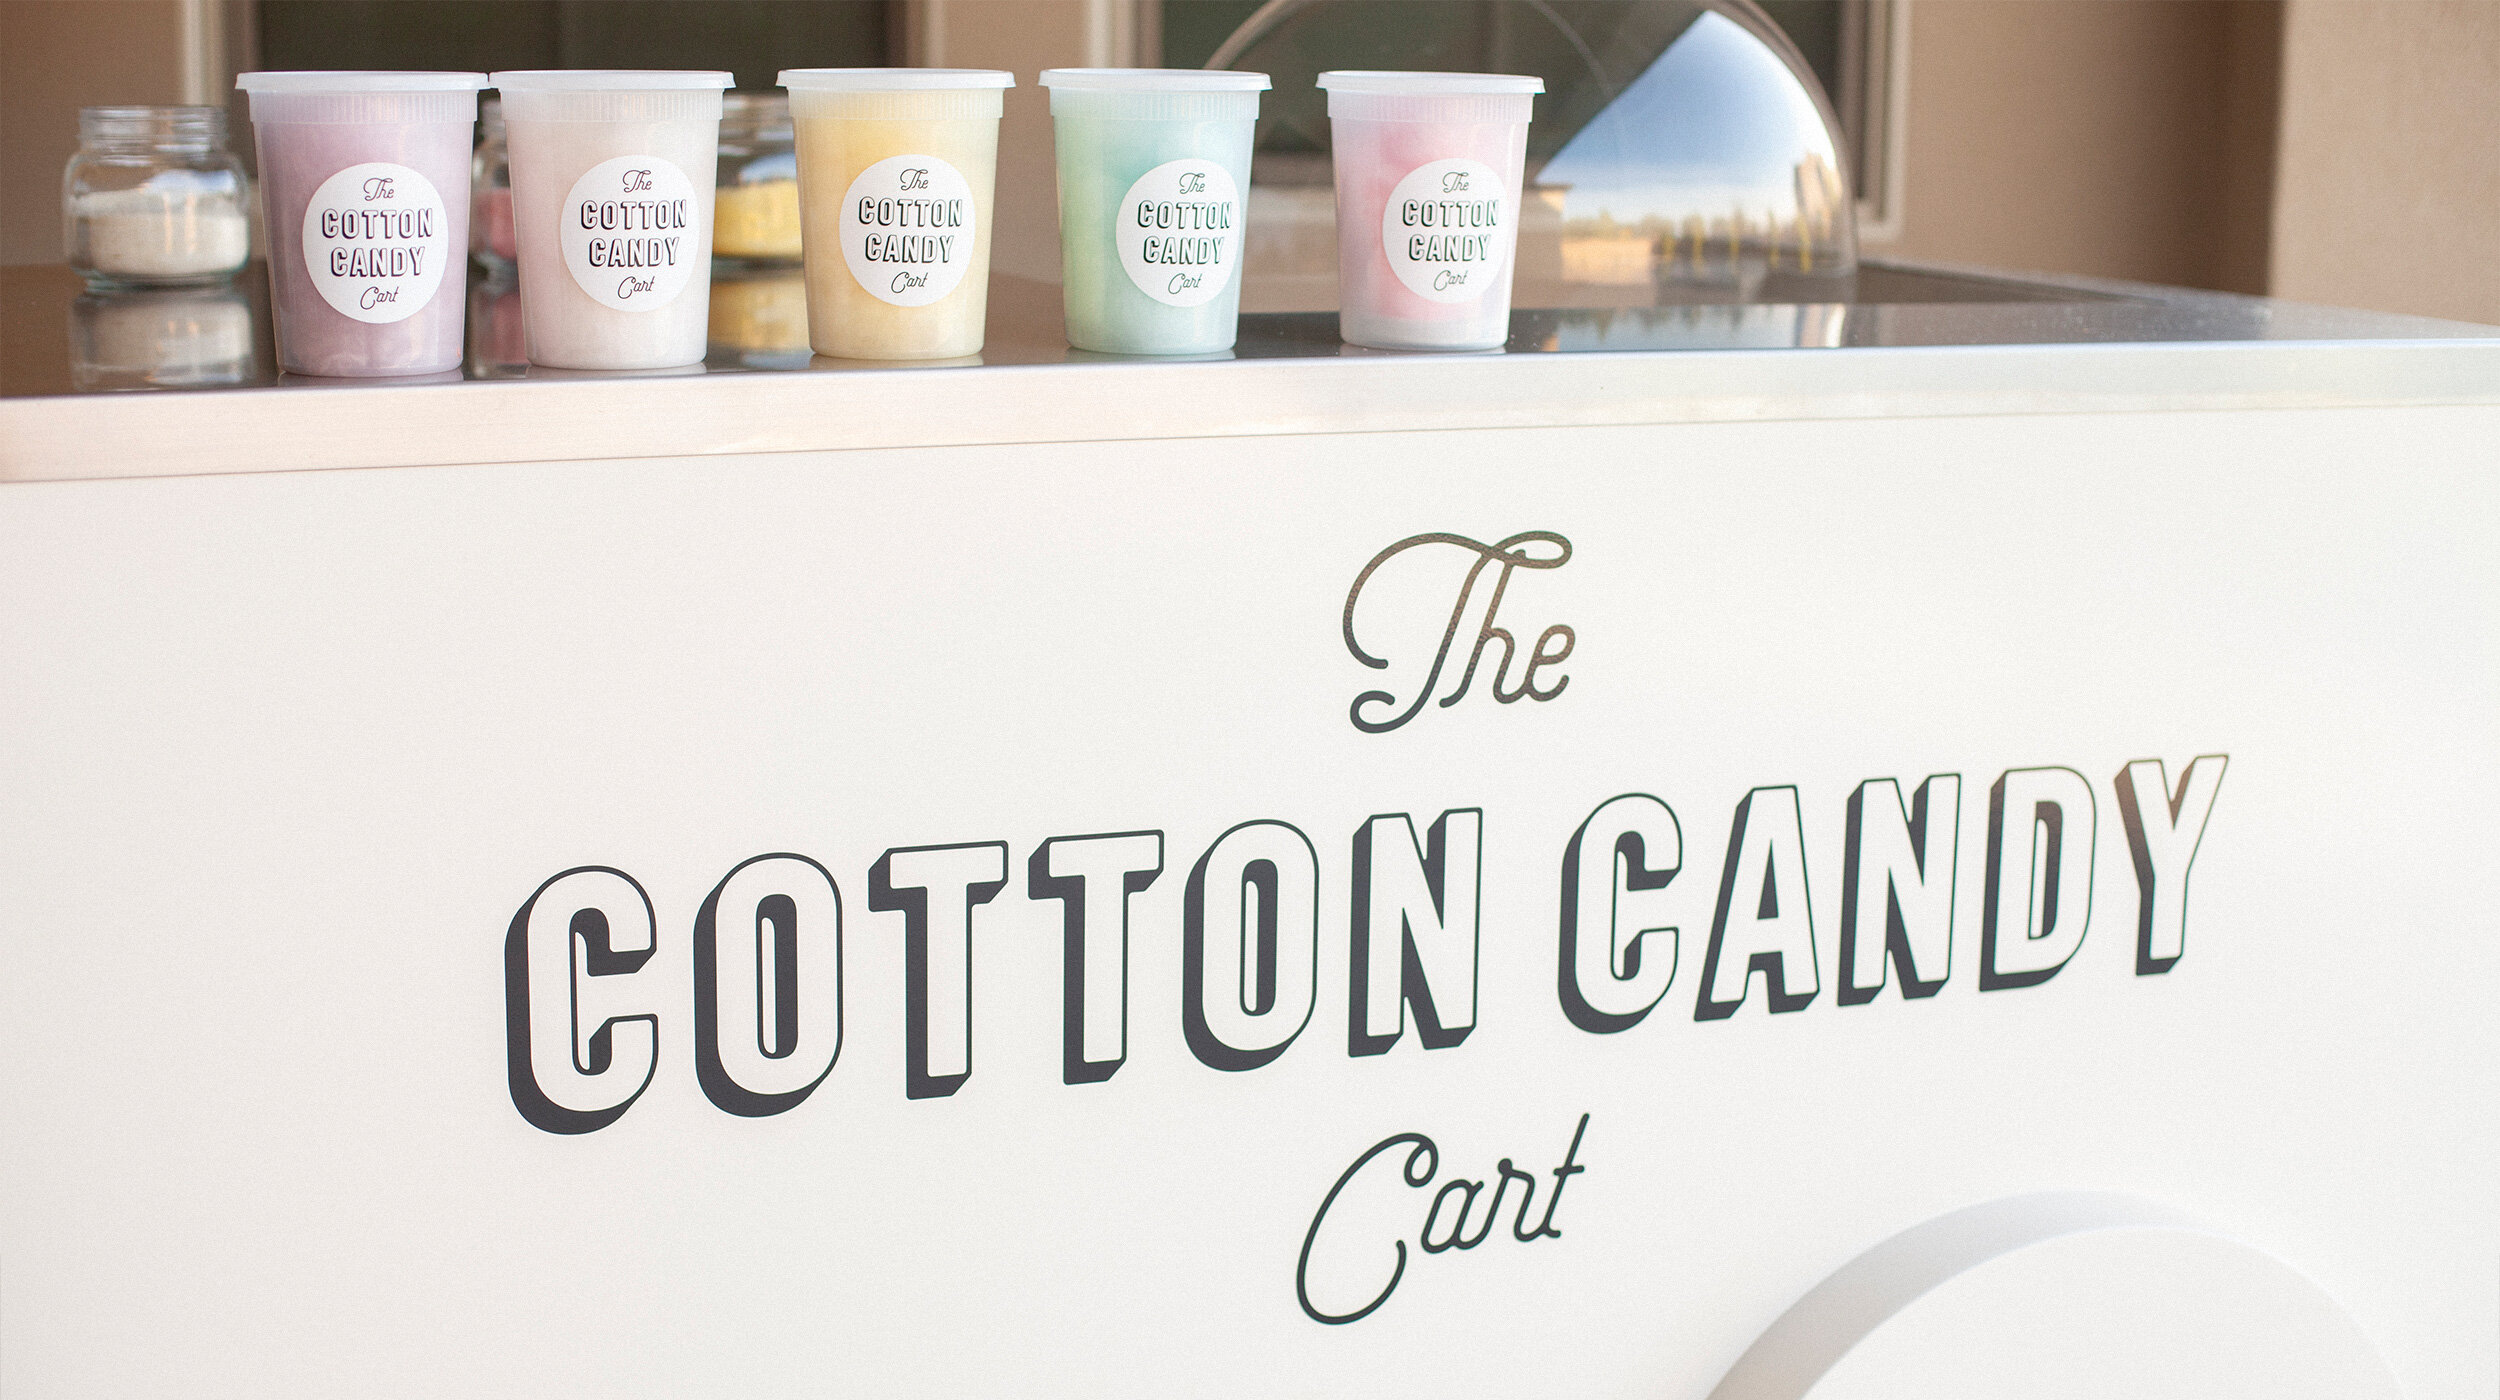 the_cotton_candy_cart_gallery_image_cart_v1.jpg